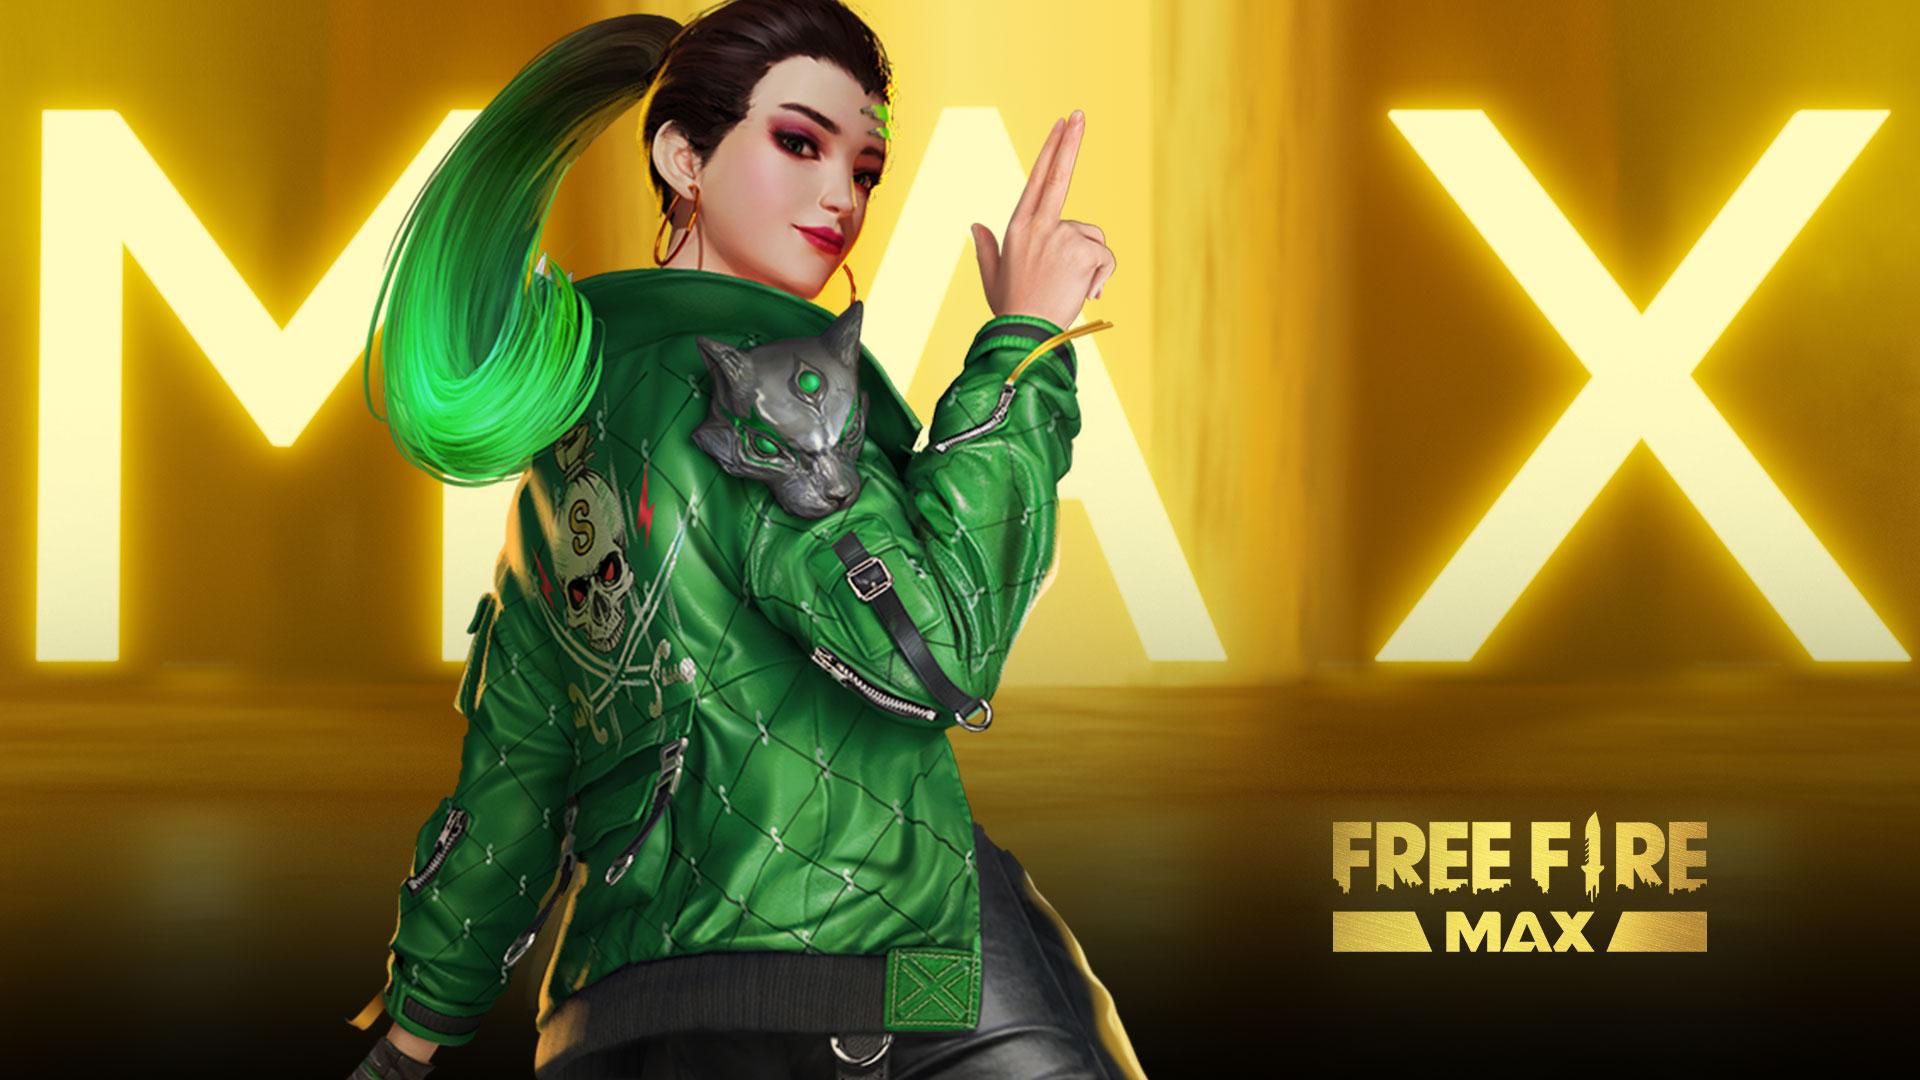 175,000 Free Fire MAX Cheater and Hacker Accounts Banned by Garena in the  Last 2 Weeks - MySmartPrice